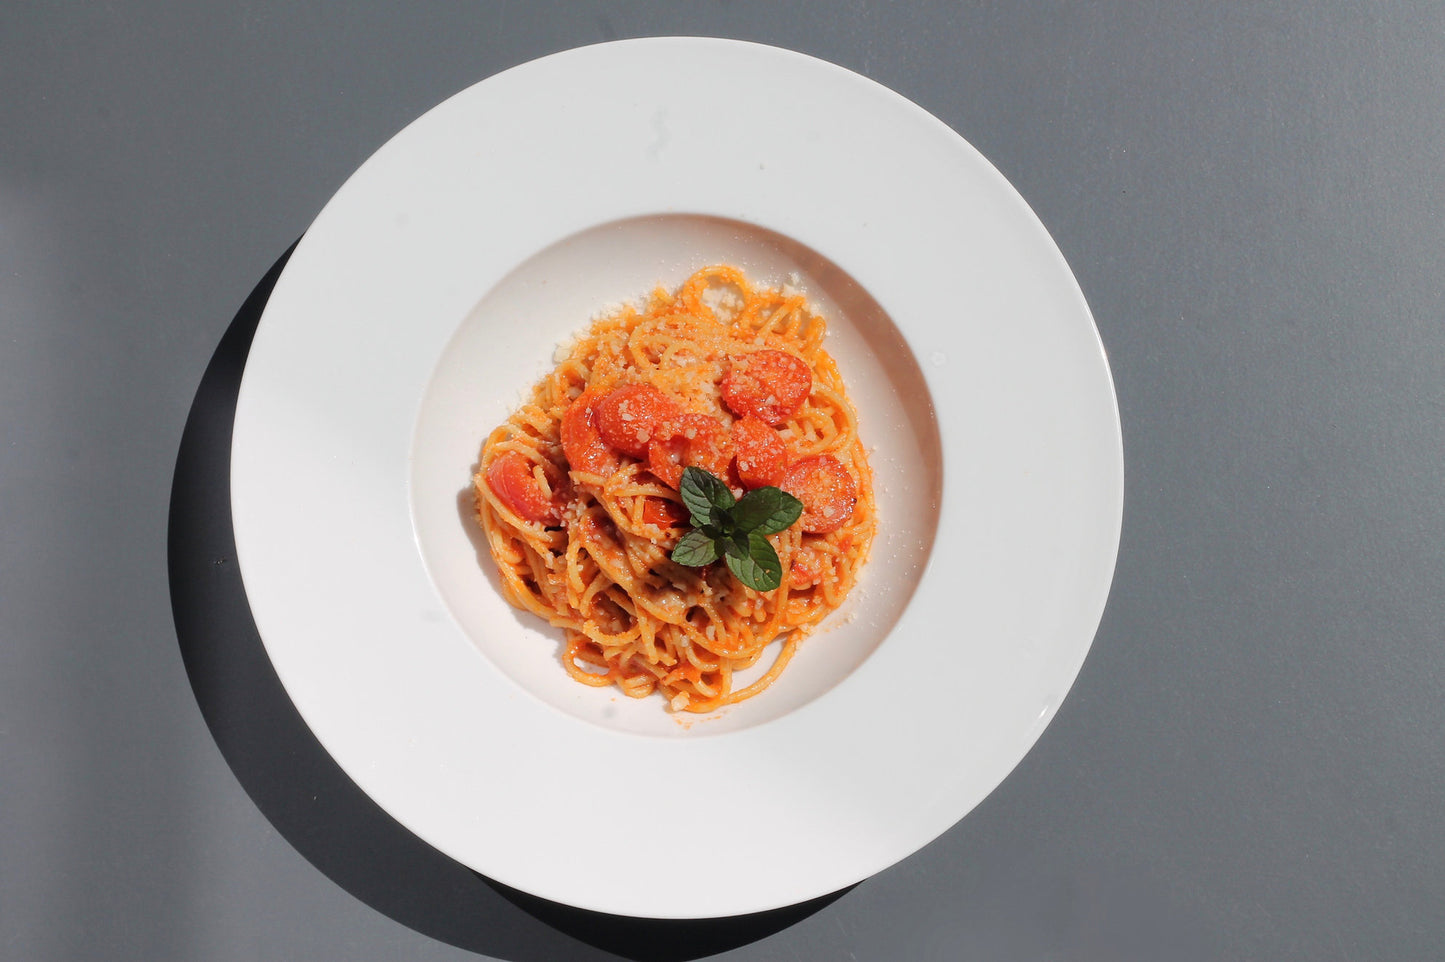 Pasta with Cherry, Tomate Sauce and Parmesan (v)